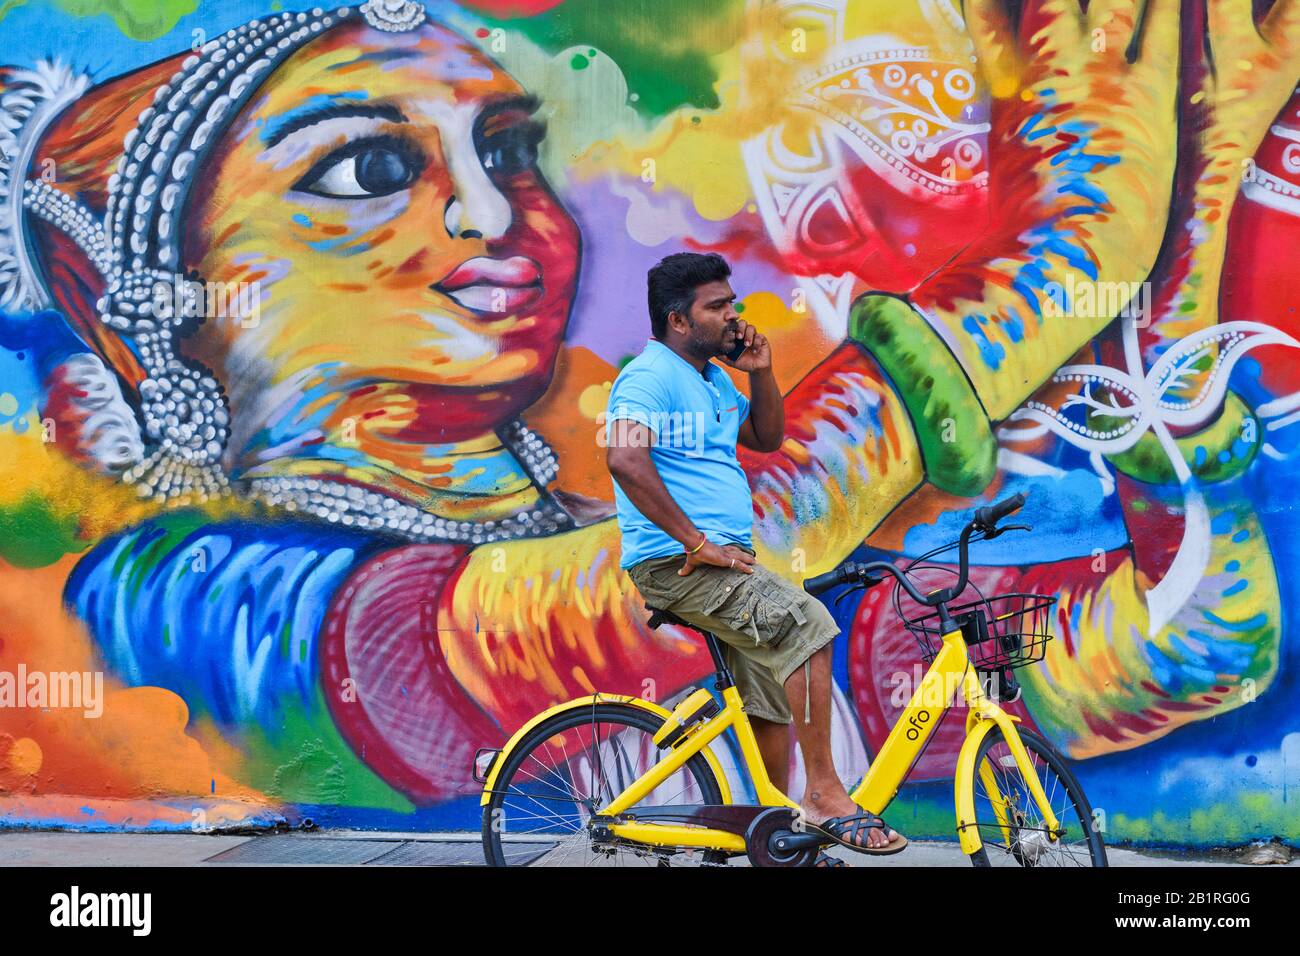 An Indian 'foreign worker' making a call on his bicycle, in front a colorful wall painting depicting a South Indian dancer, in Little India, Singapore Stock Photo